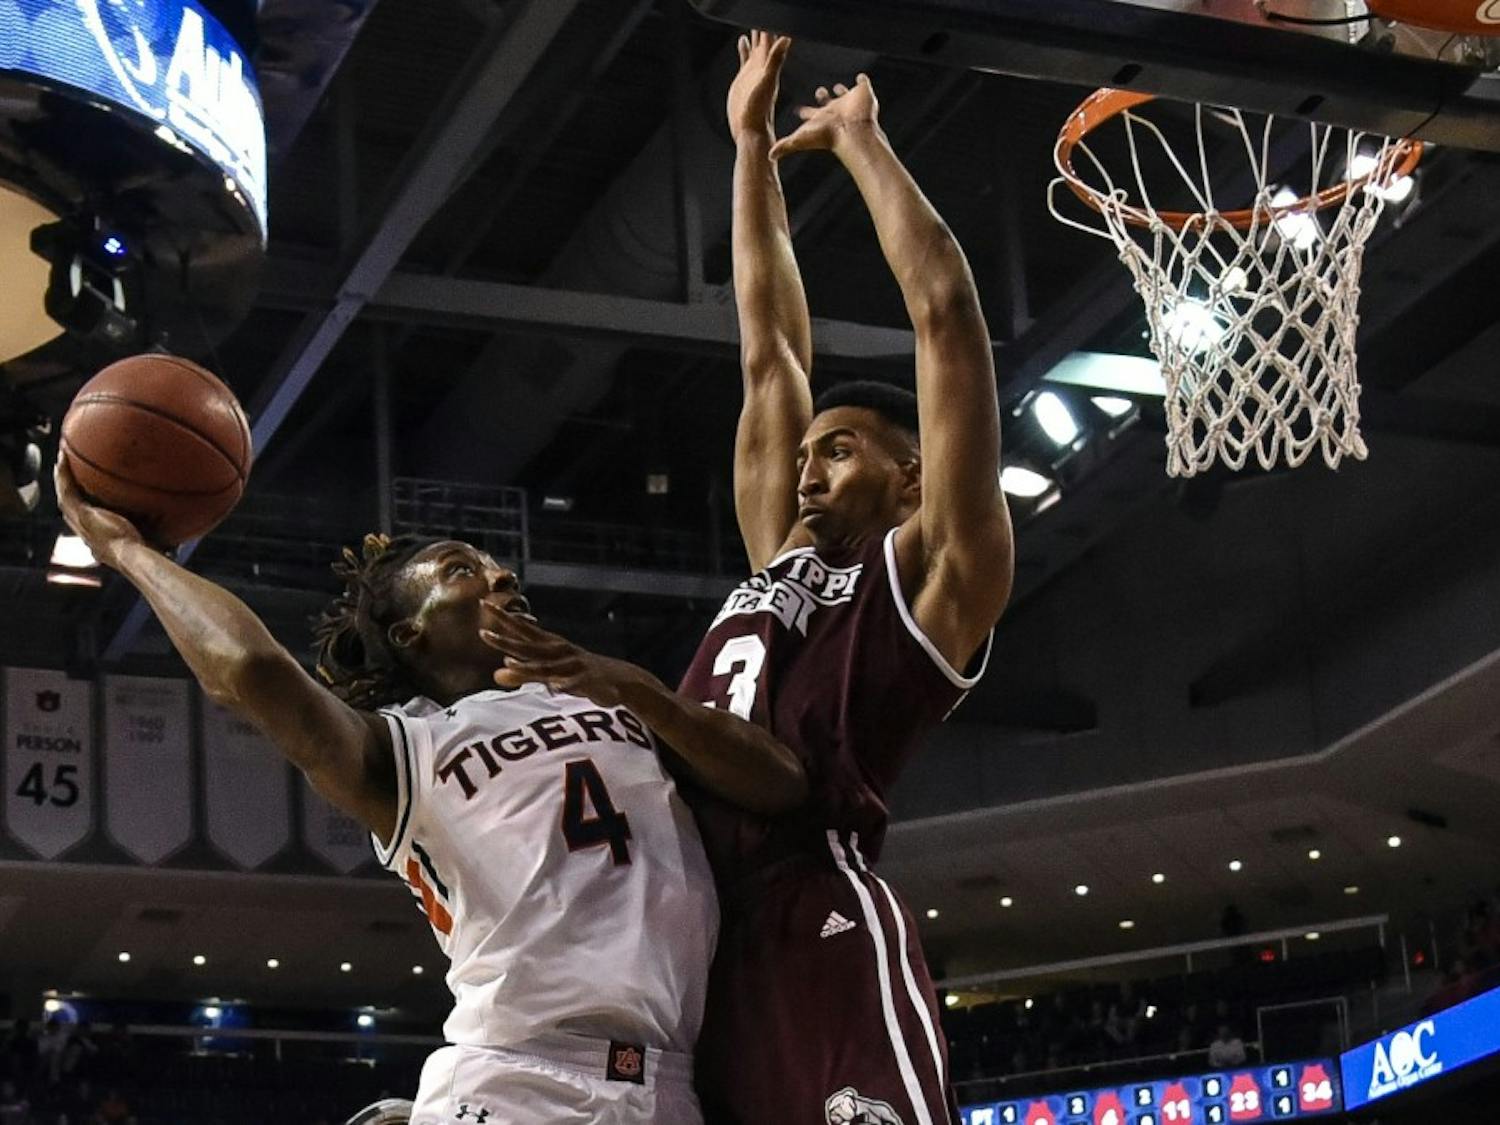 Auburn Tigers guard T.J. Dunans (4) goes up against Mississippi State Bulldogs guard Xavian Stapleton (3) during the first half of the Auburn vs Mississippi State basketball on Tuesday, Feb. 7, 2017, in Auburn, Ala.